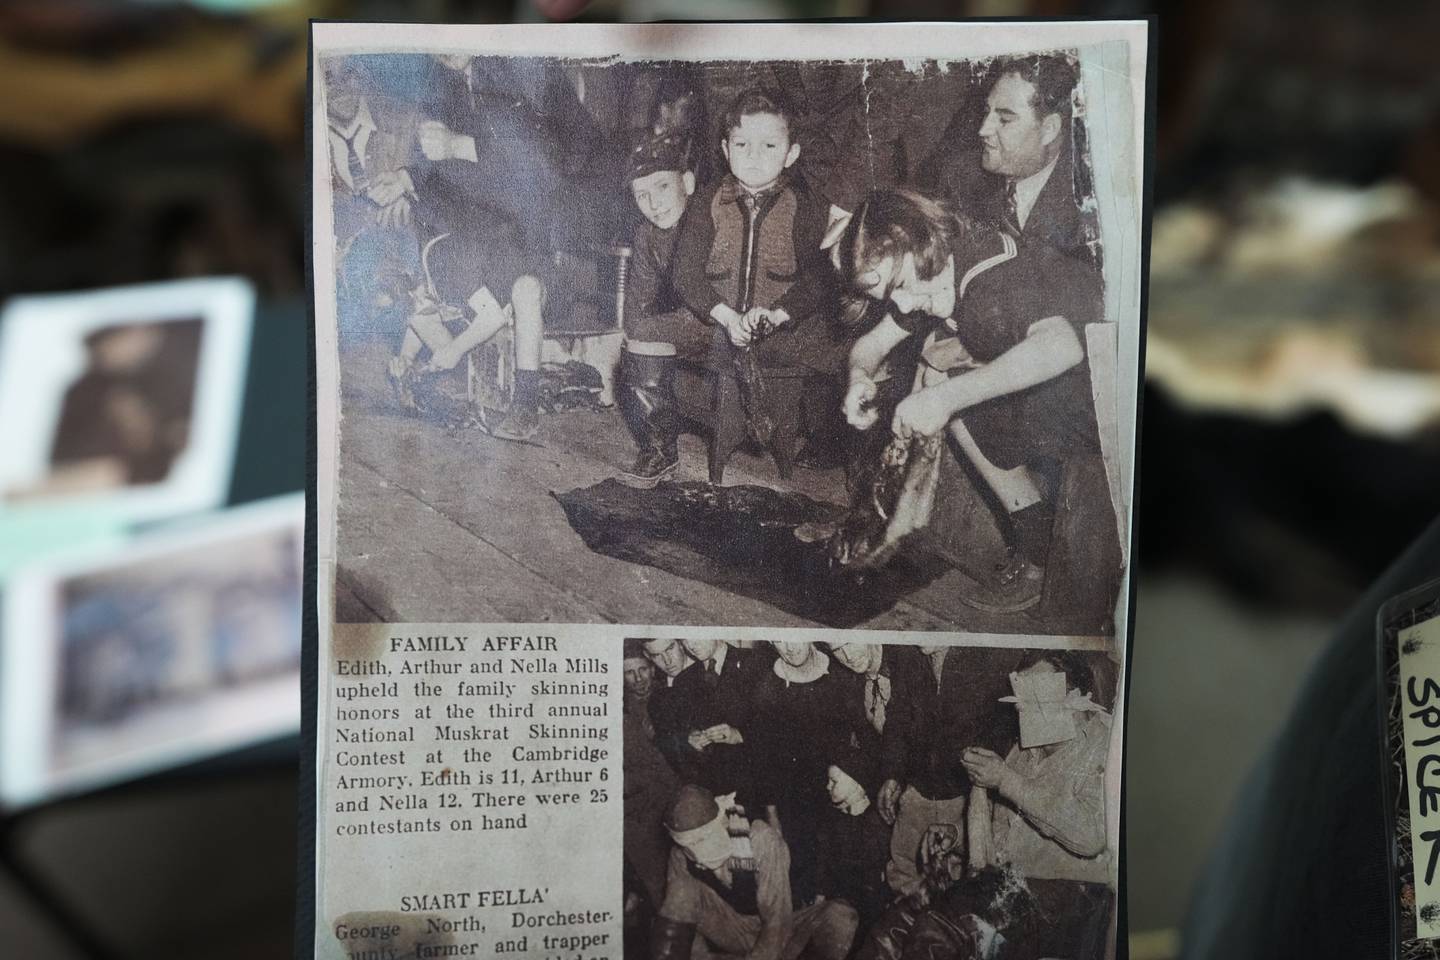 A newspaper clipping fromThe Baltimore Sun in 1938 shows Nellie Flowers skinning a muskrat in one of the first ever skinning competitions.